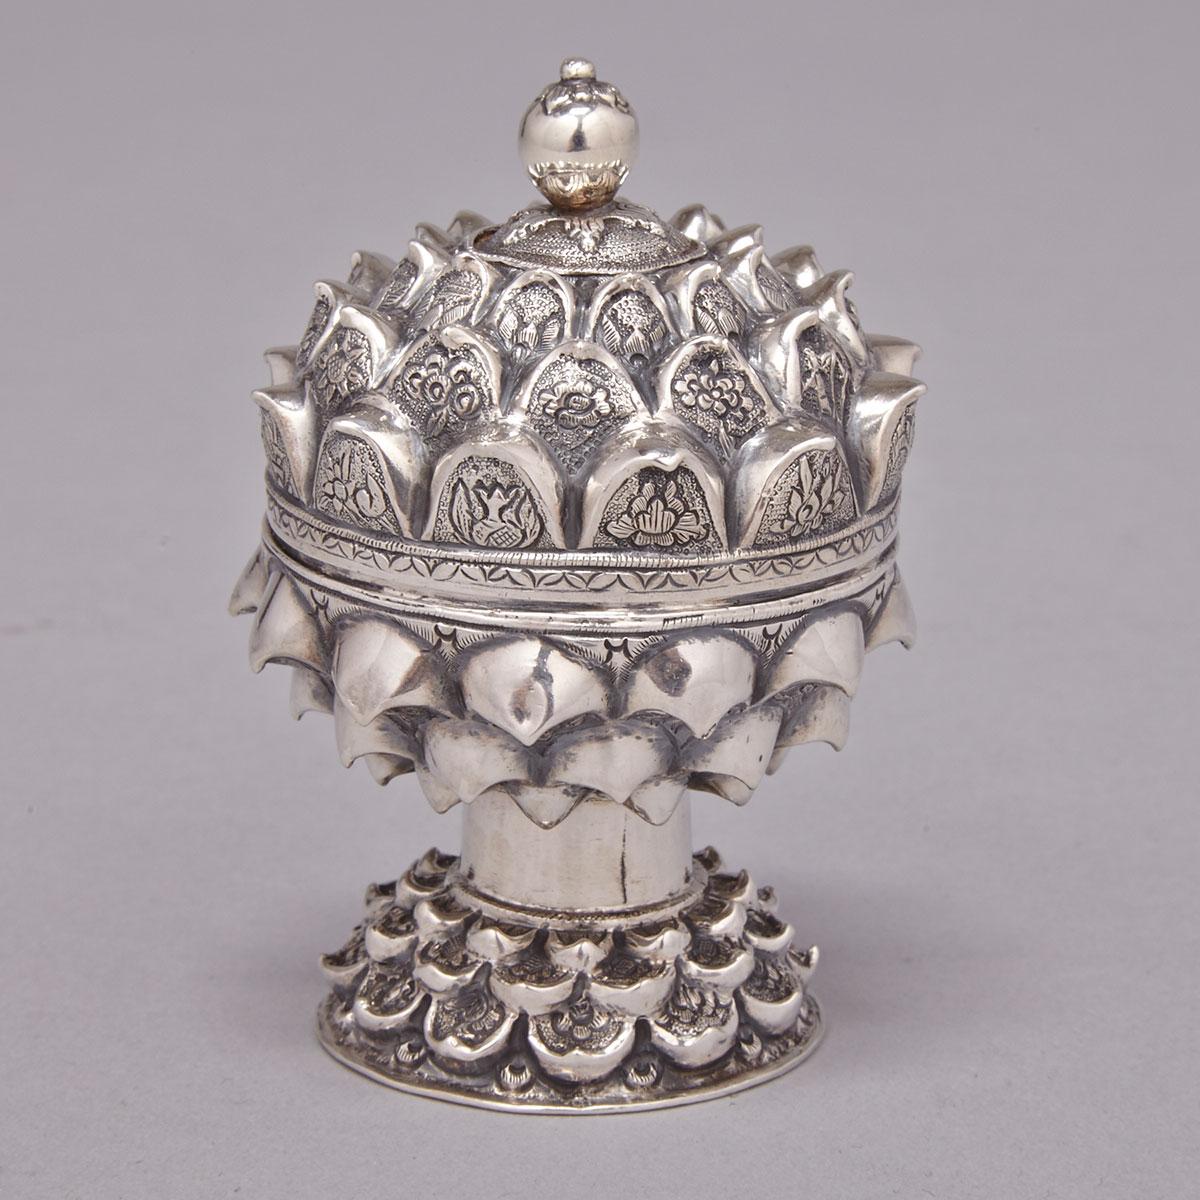 Continental Silver Covered Spice Box, 19th century